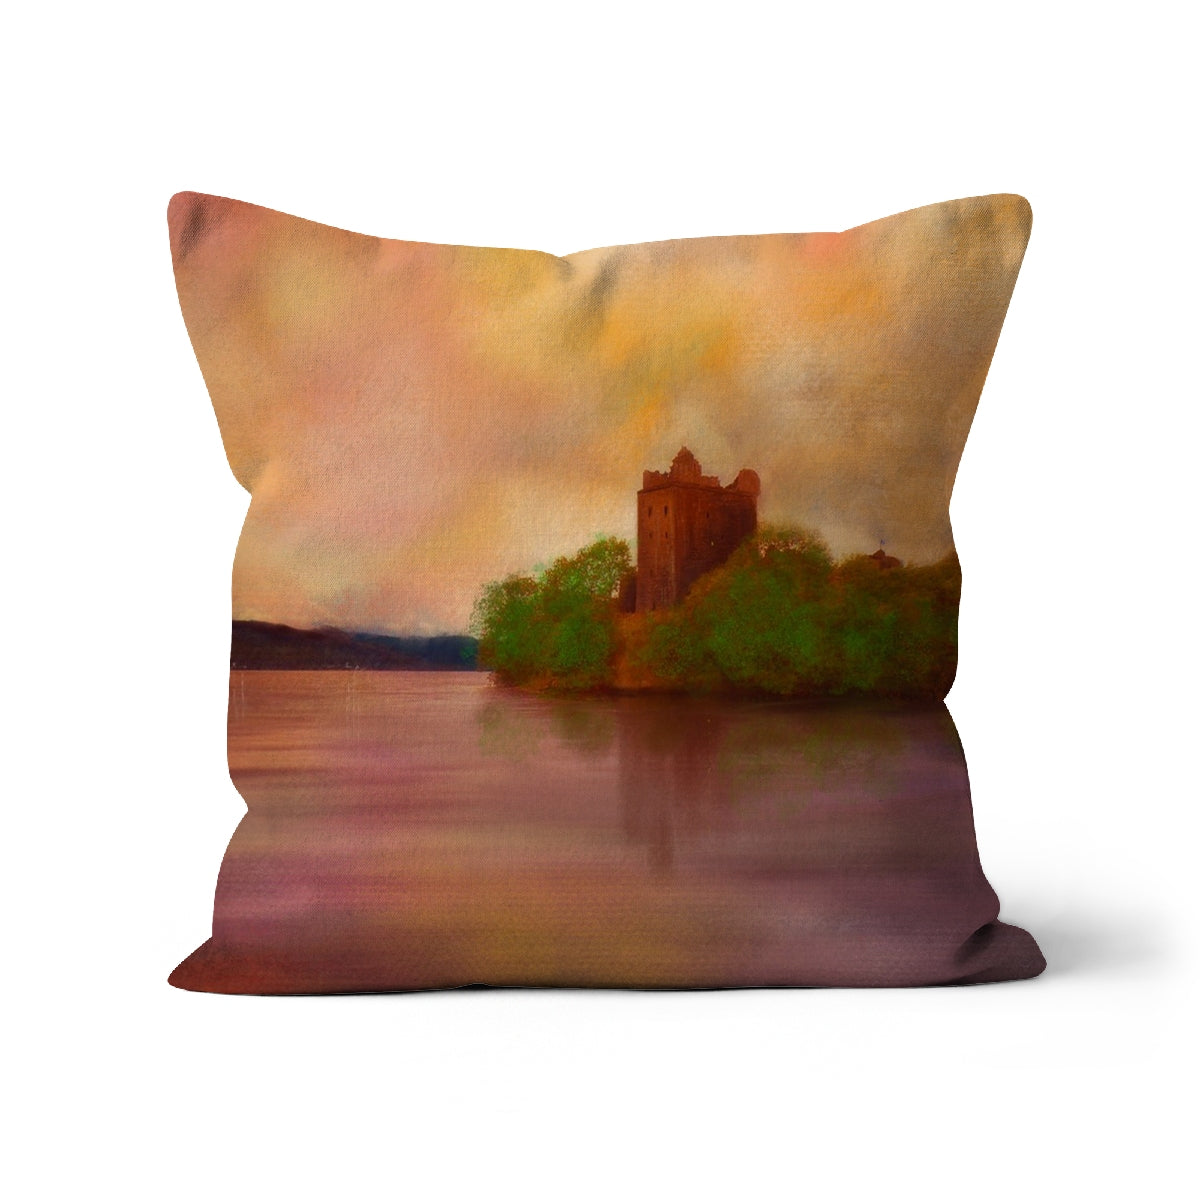 Urquhart Castle Art Gifts Cushion-Cushions-Historic & Iconic Scotland Art Gallery-Linen-22"x22"-Paintings, Prints, Homeware, Art Gifts From Scotland By Scottish Artist Kevin Hunter